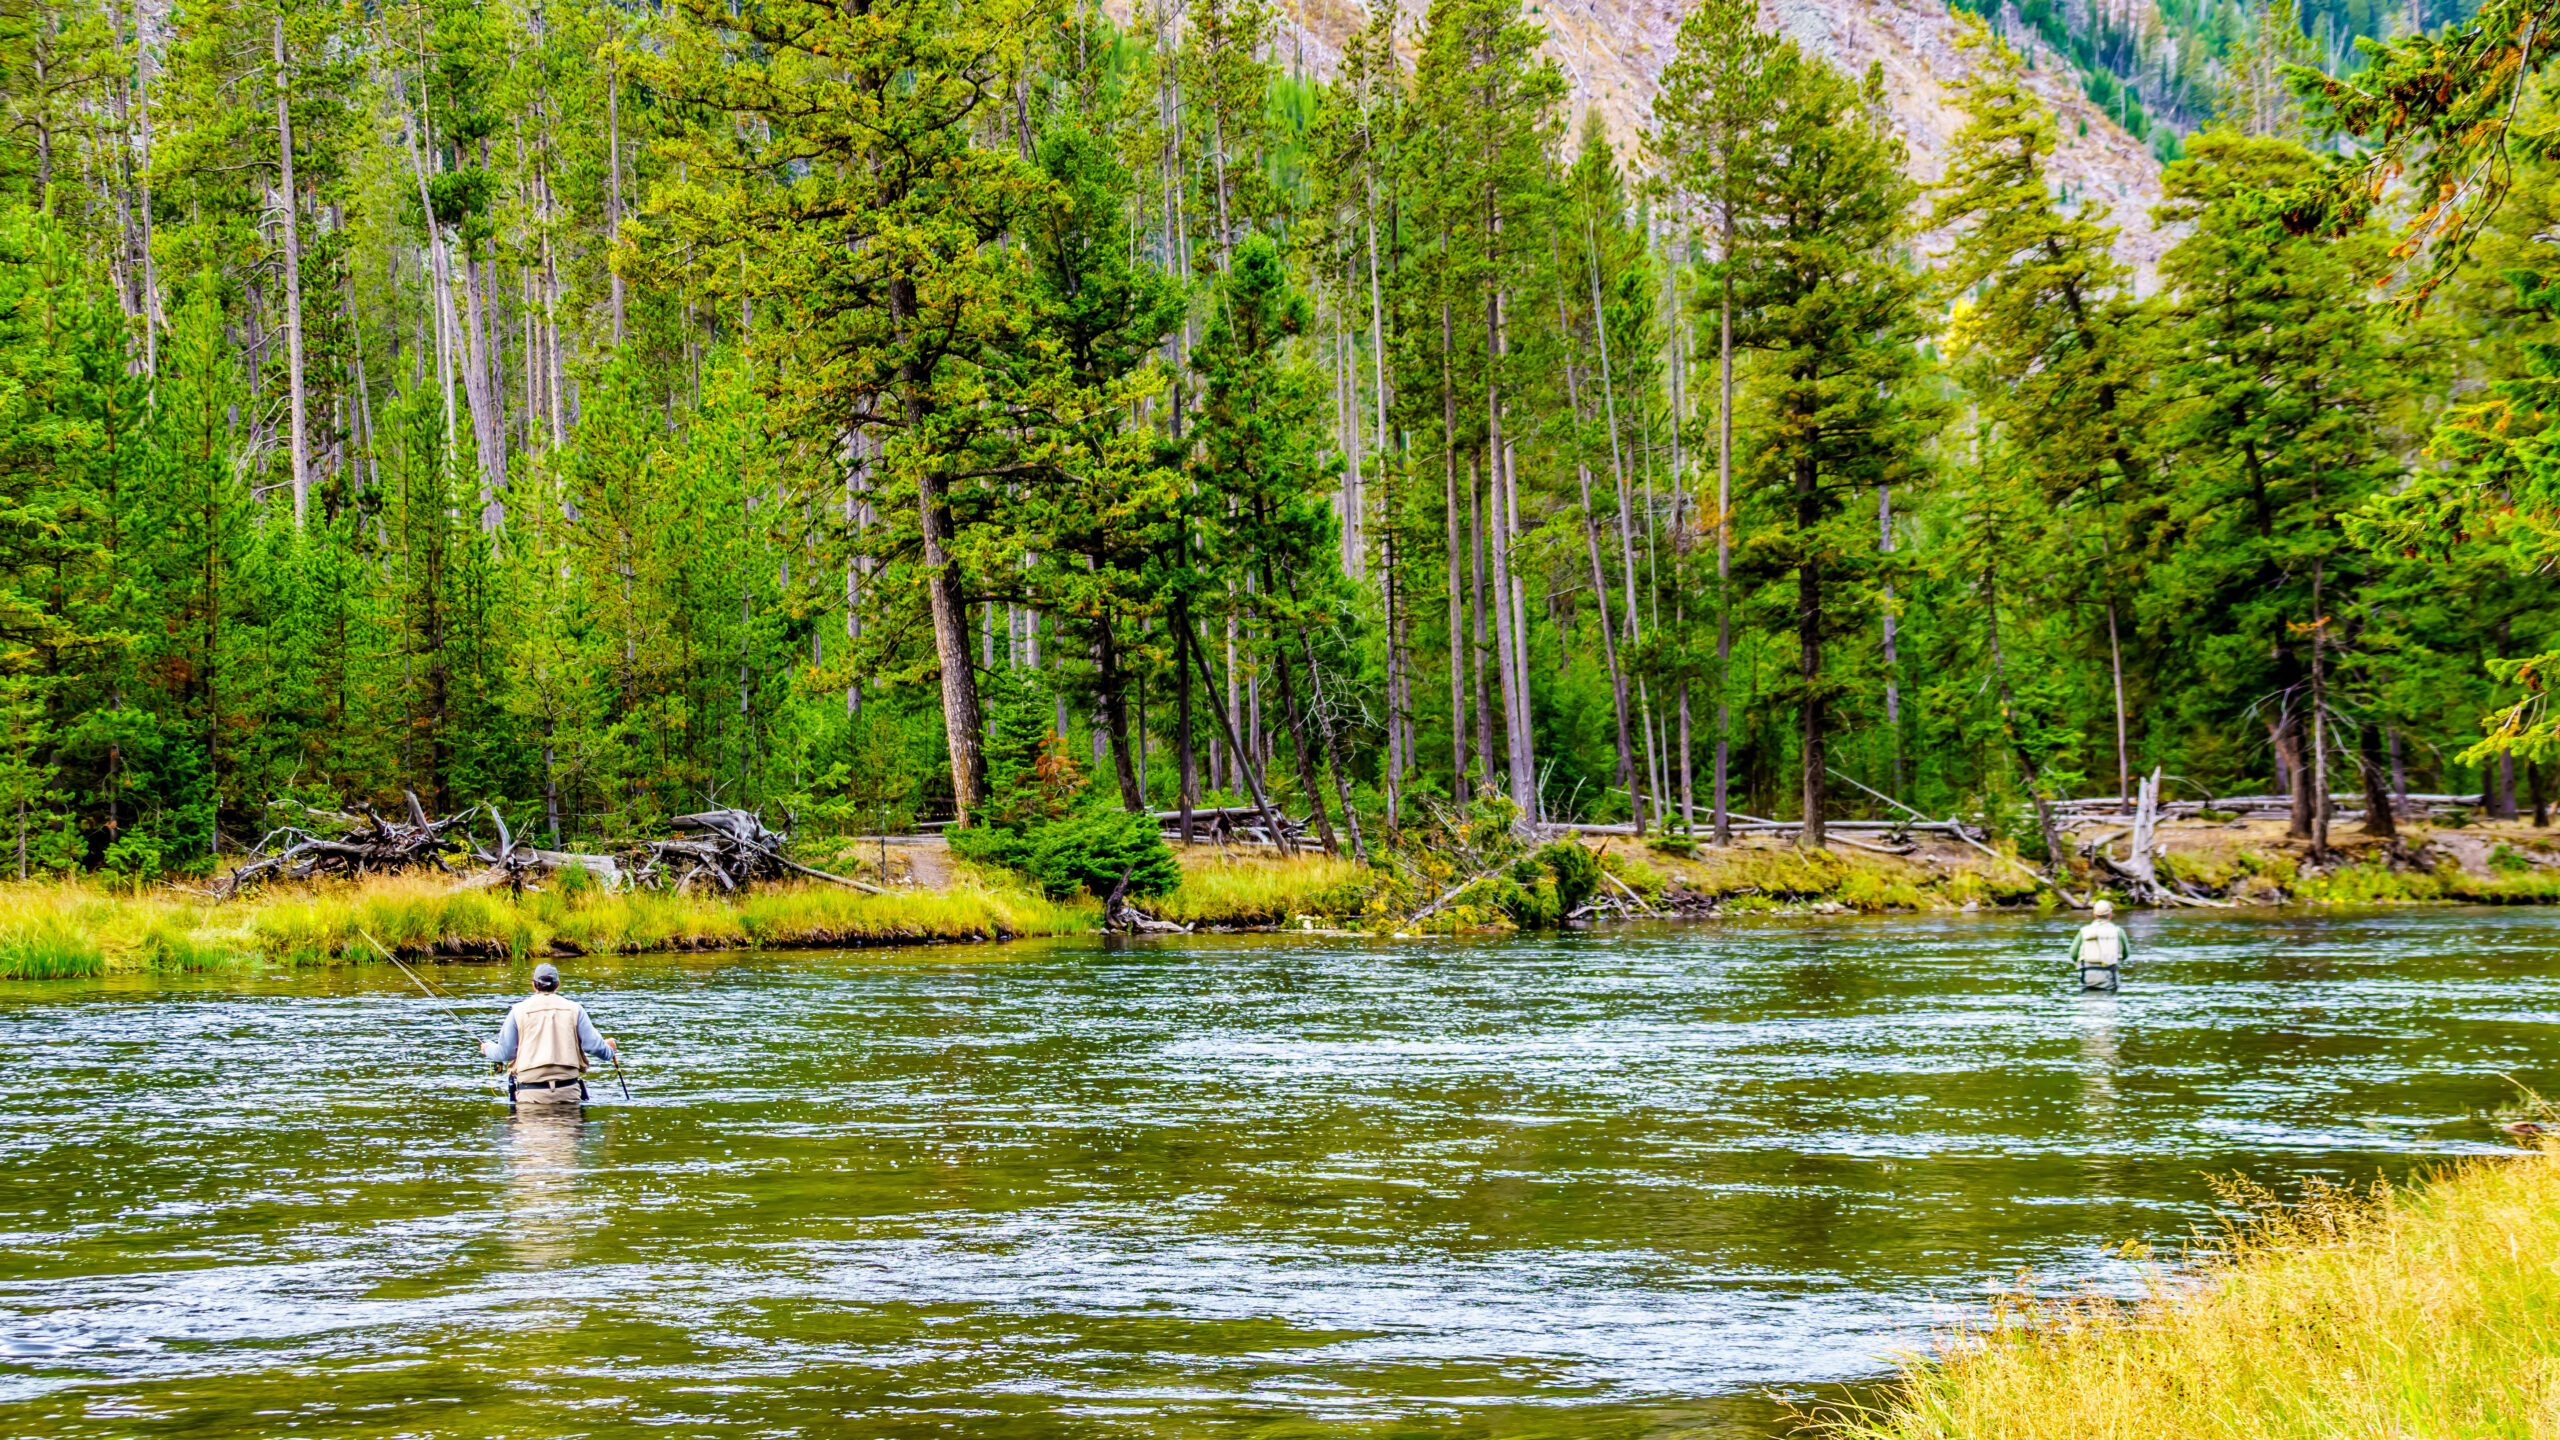 Fly fishing in the Madison River as it flows through the western